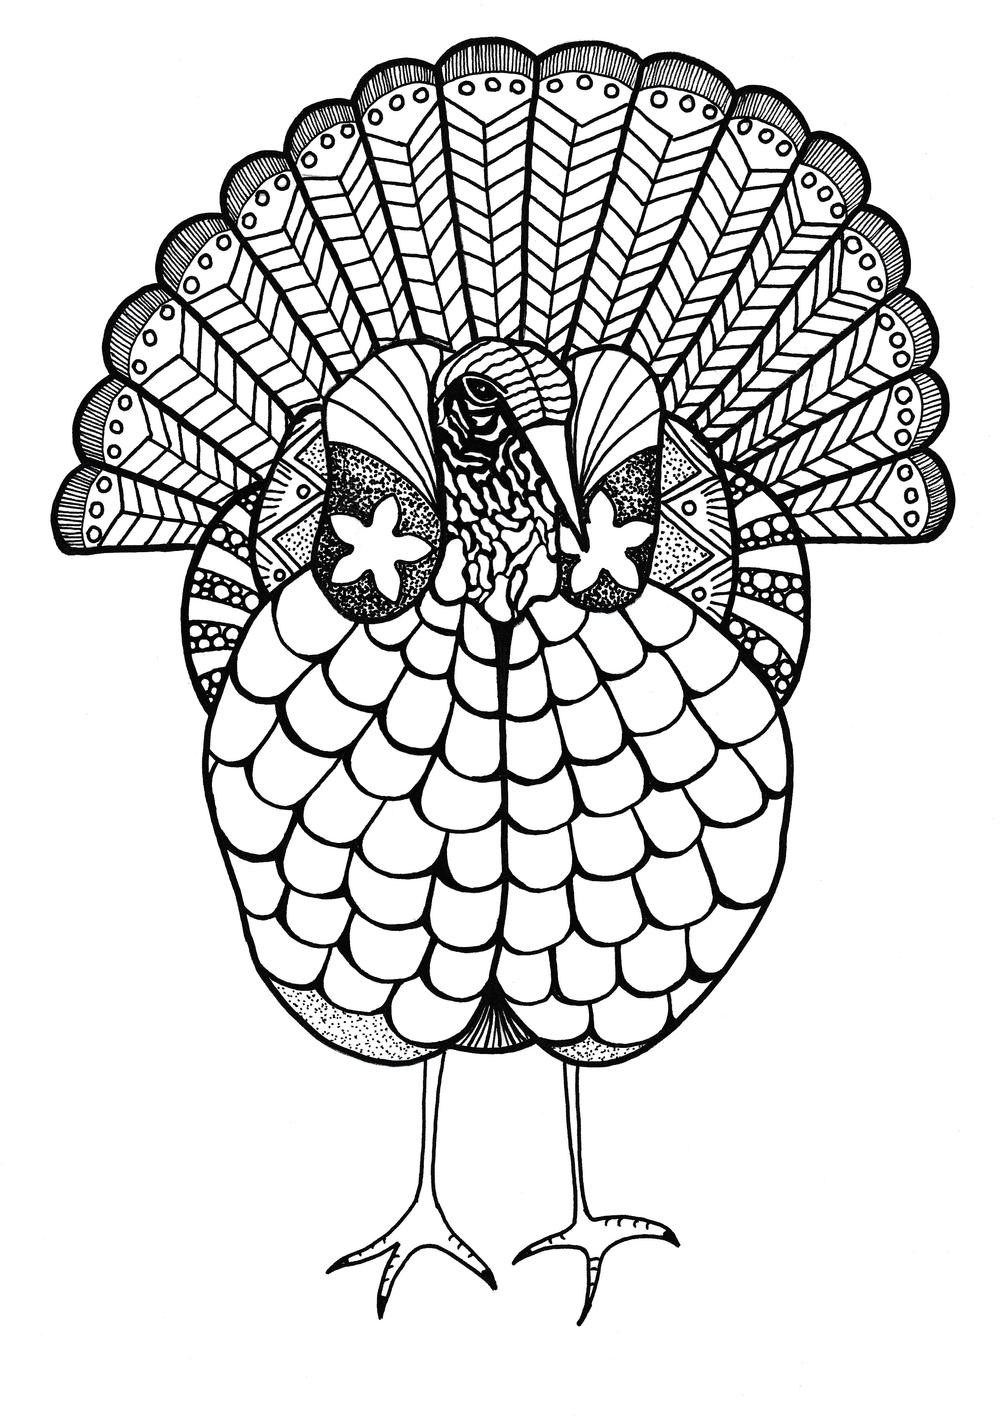 Turkey Coloring Pages For Adults
 Colorful Turkey Adult Coloring Page